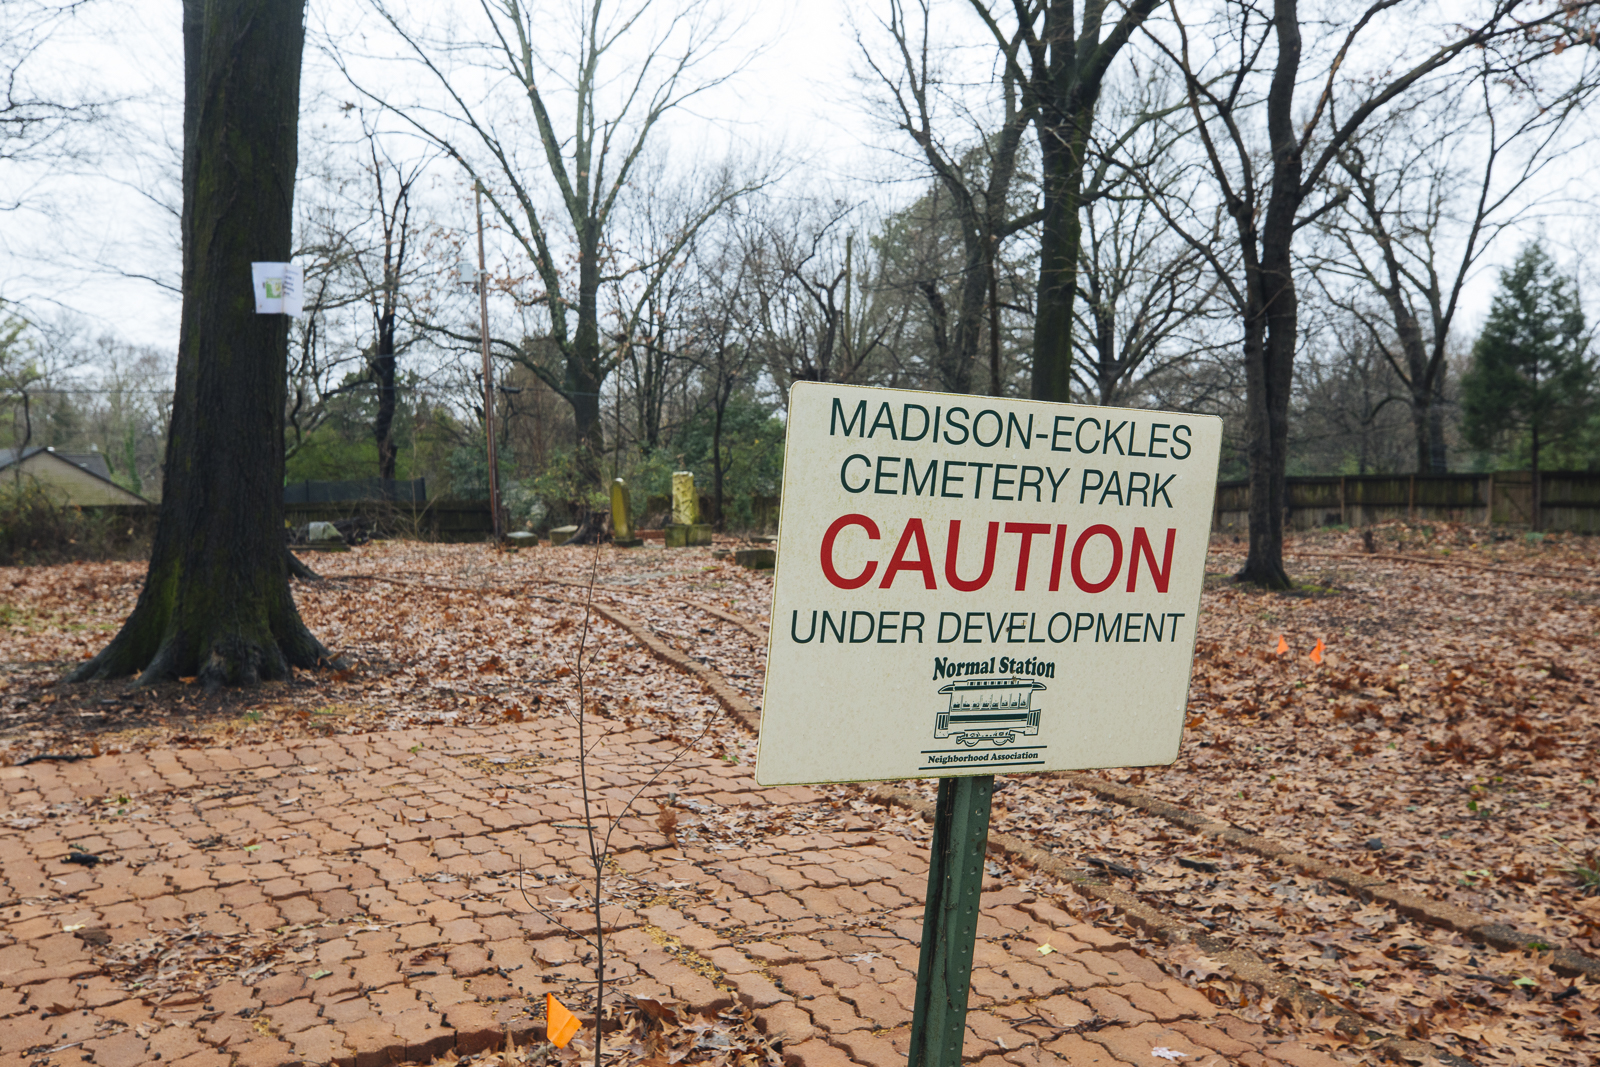 A sign at the entrance of Madison-Eckles Cemetery Park cautions visitors that the park is still under development. A brick lined path to the right of the patio area leads to the cemetery, located in the center of the park. (Ziggy Mack)